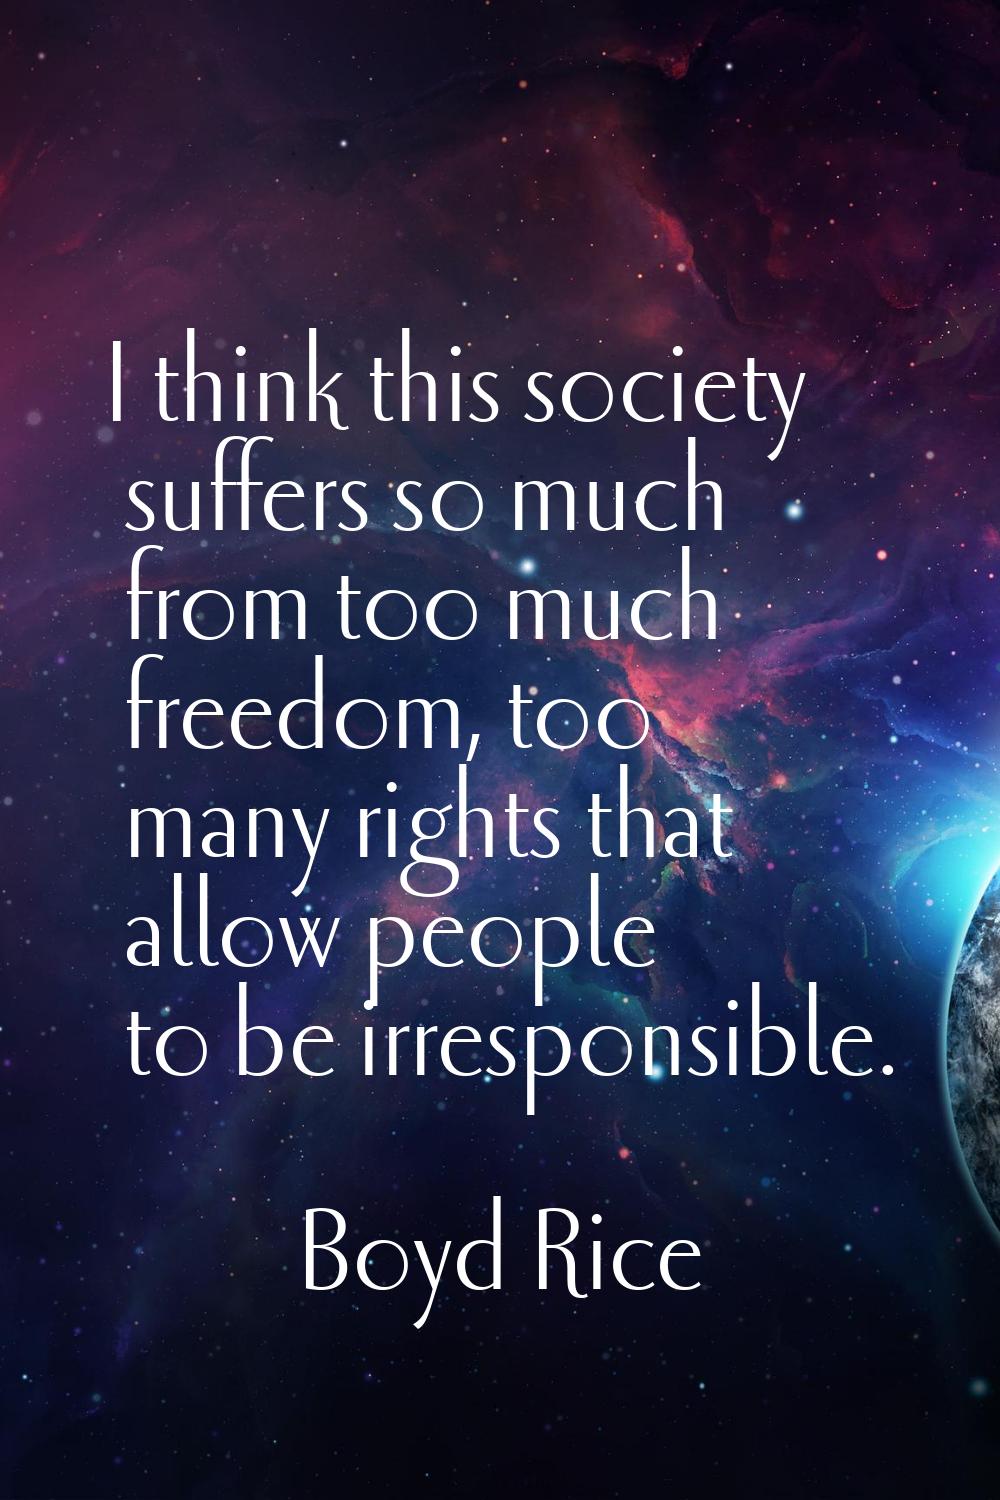 I think this society suffers so much from too much freedom, too many rights that allow people to be